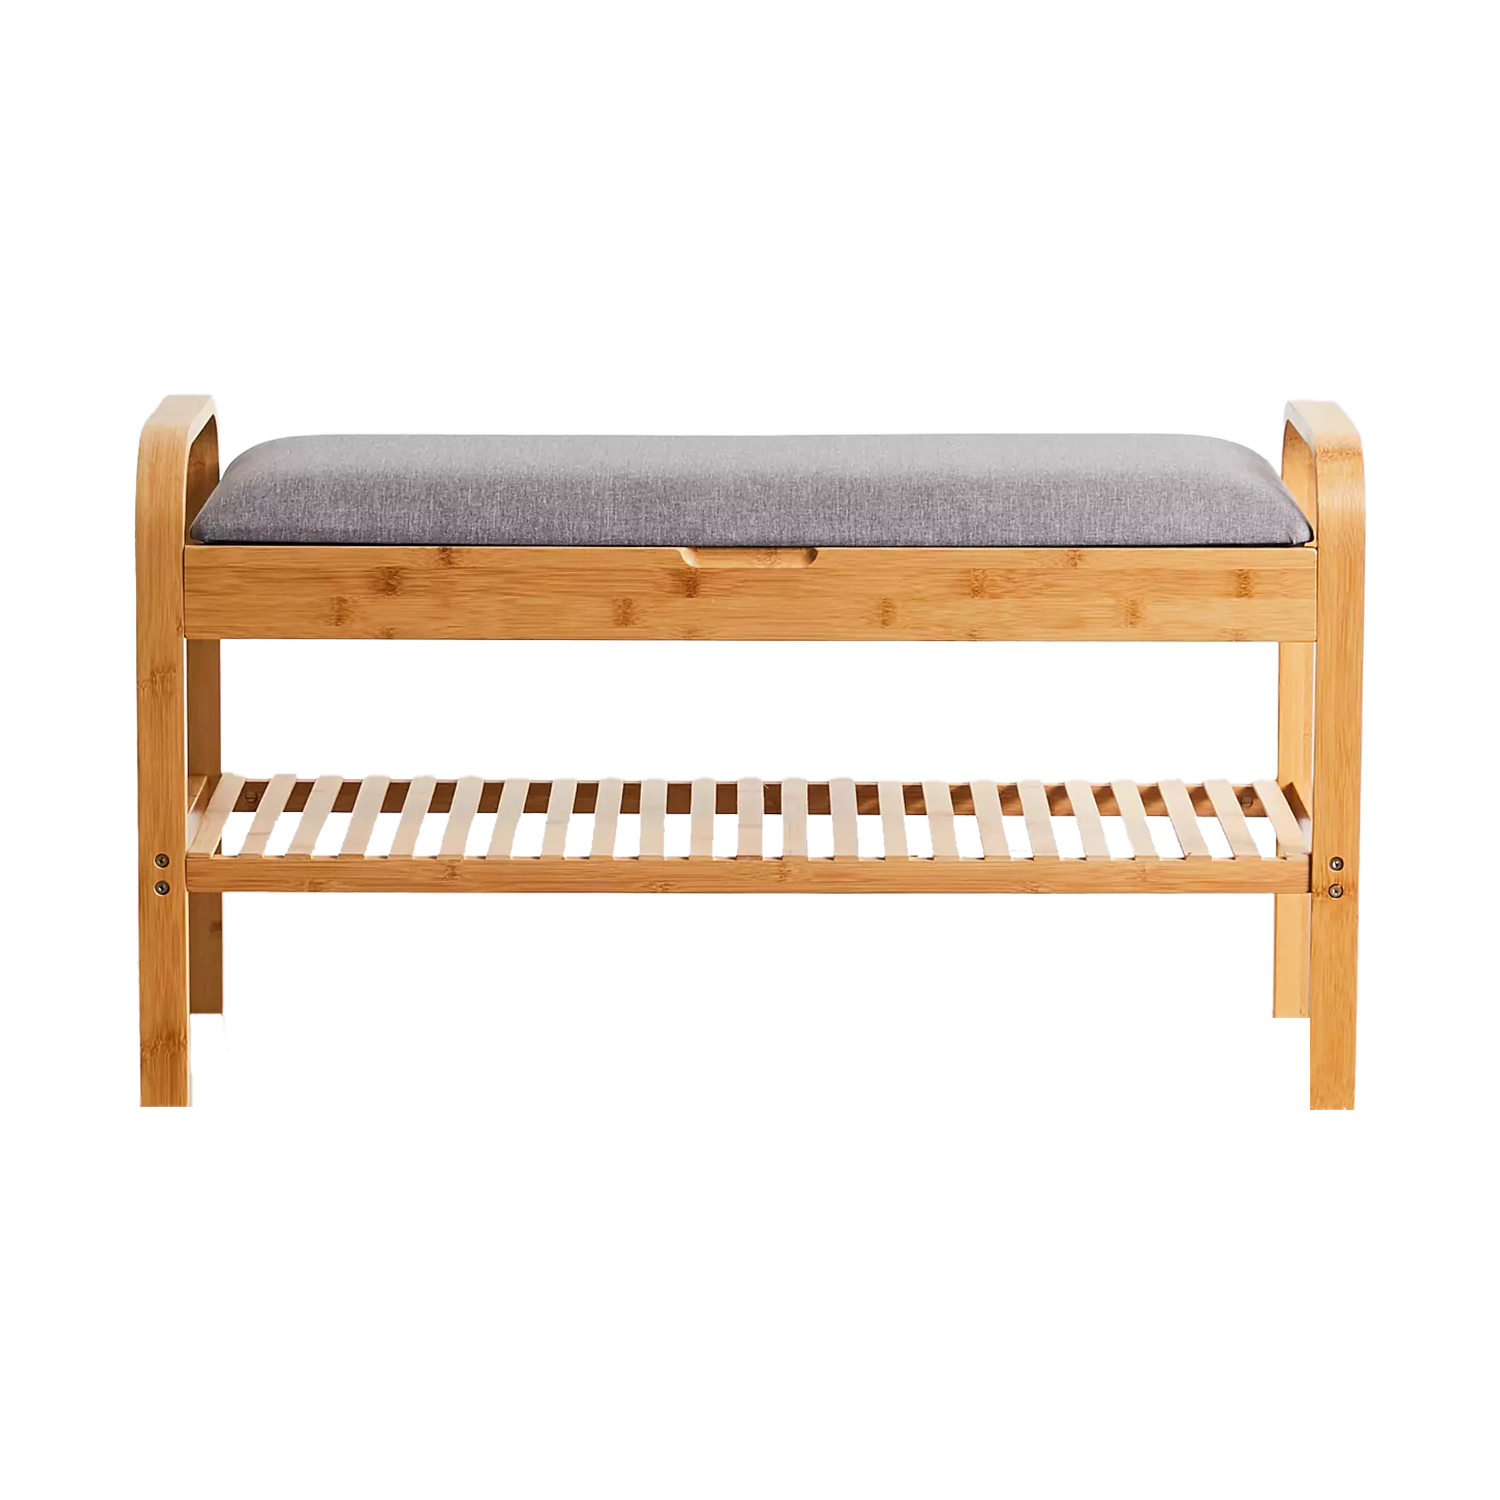 Upholstered bamboo storage bench from Urban Outfitters